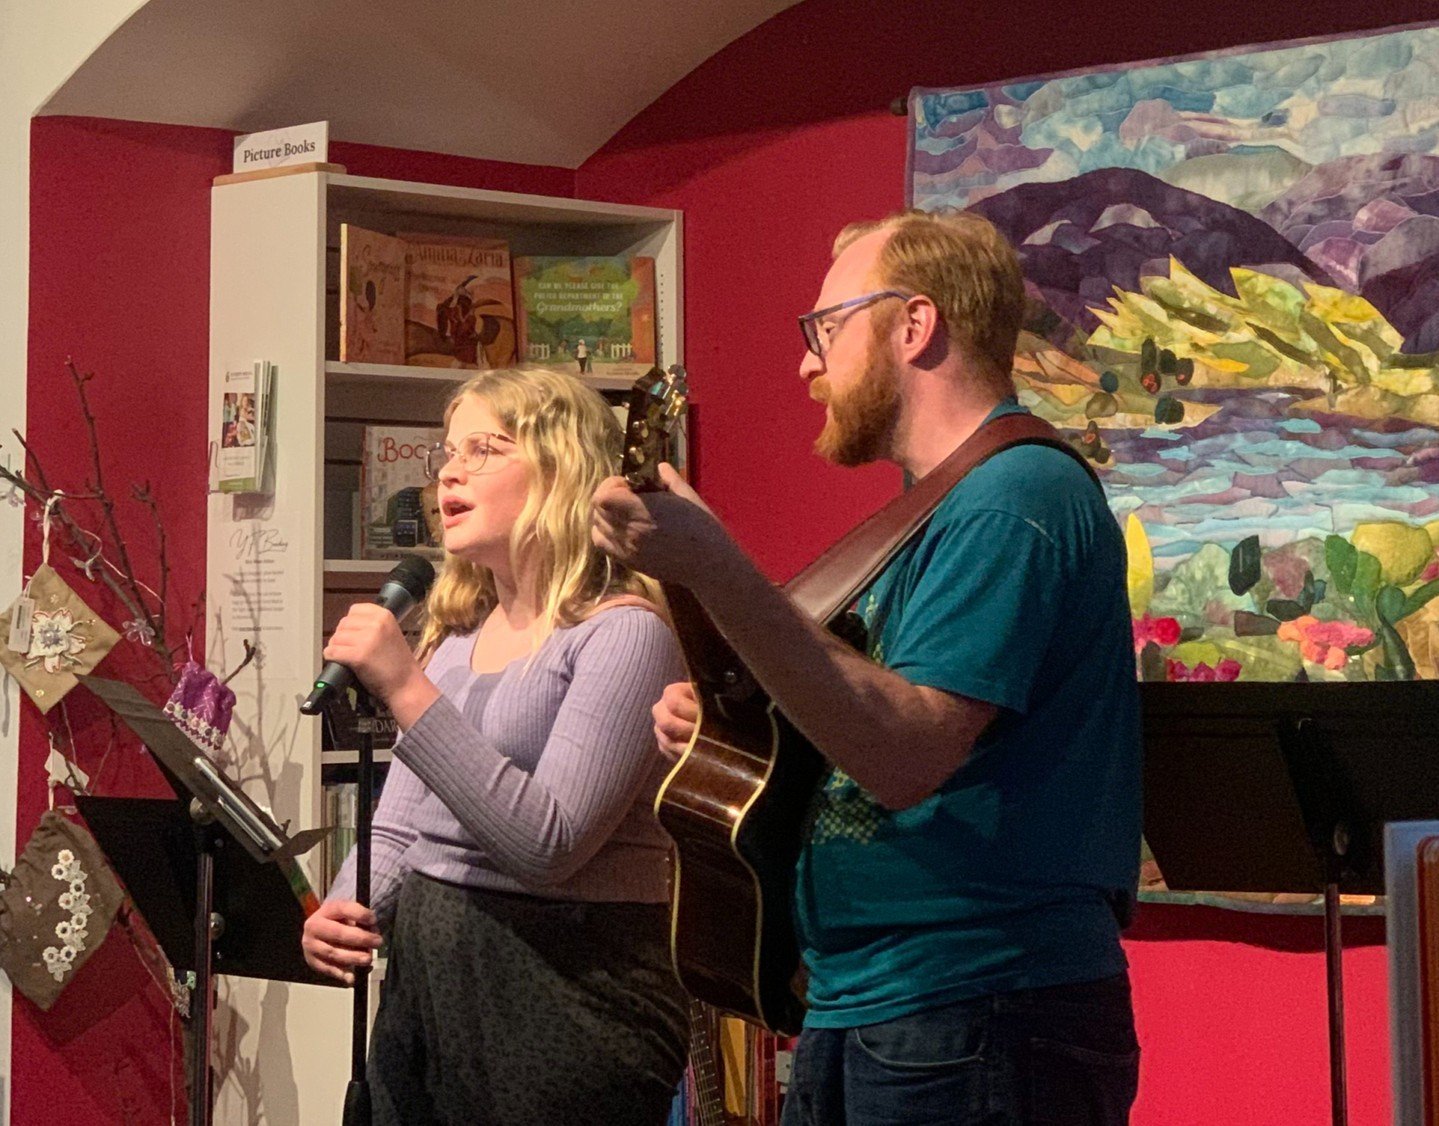 Don't forget, our Open Mic night is happening this Saturday at 7 PM! Make sure to RSVP at hello@bighillbooks.com to secure your spot, but even if you don't, we'll do our best to fit you in. 🎤📅 

We've had poetry, music, stories, and comedy. As long